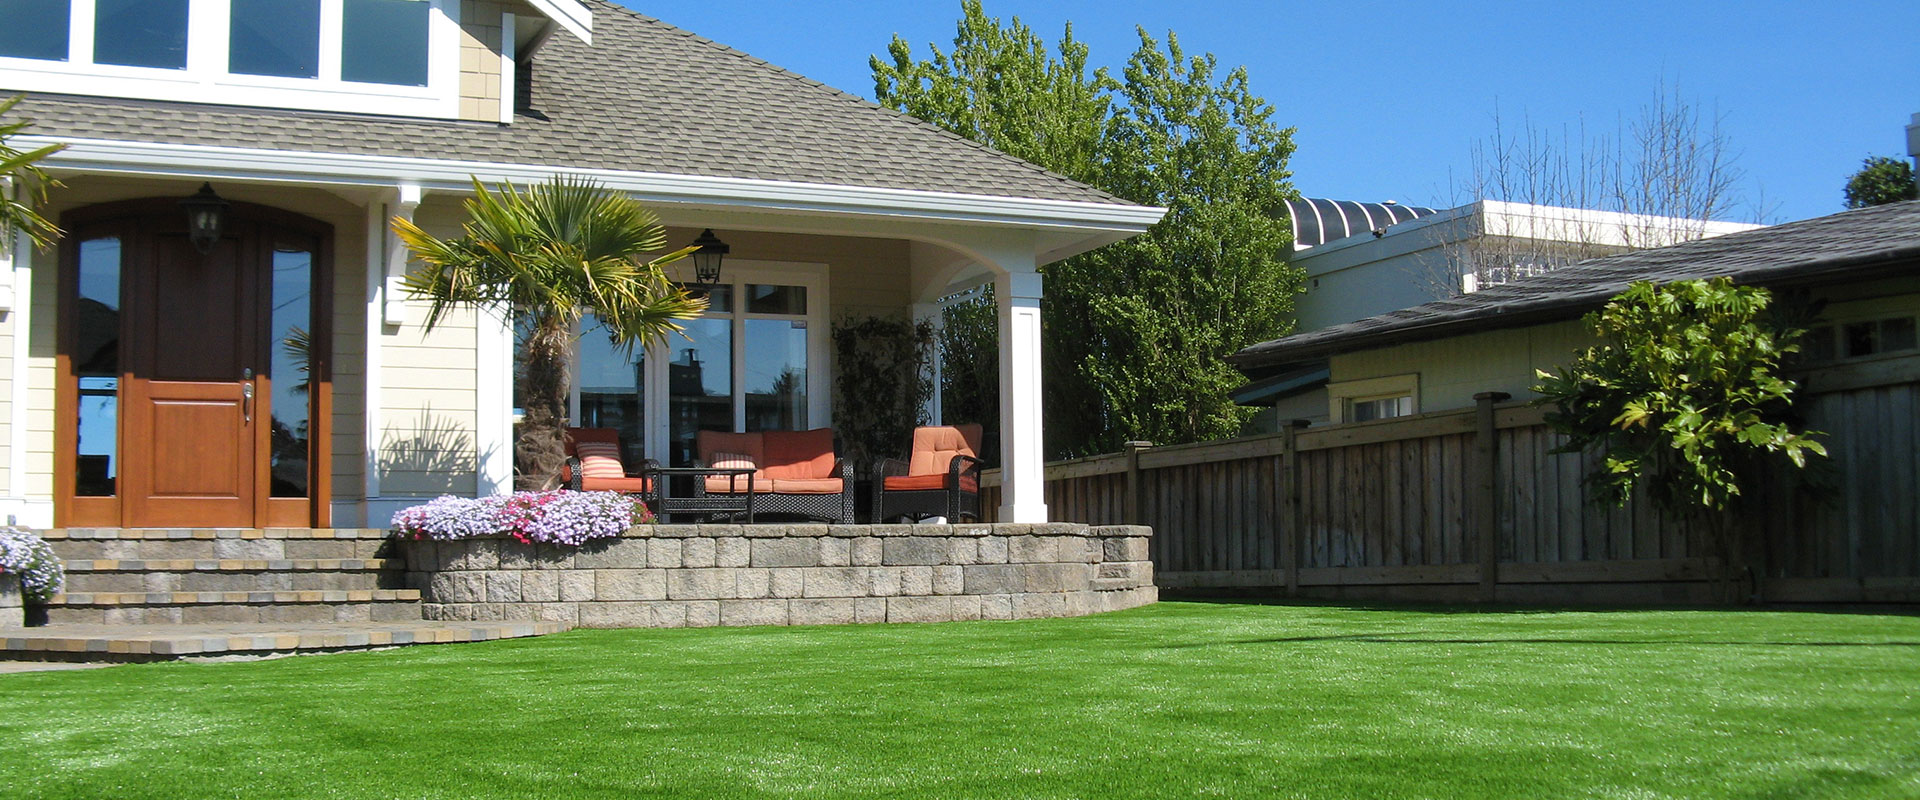 Artifical grass in front lawn of residential home